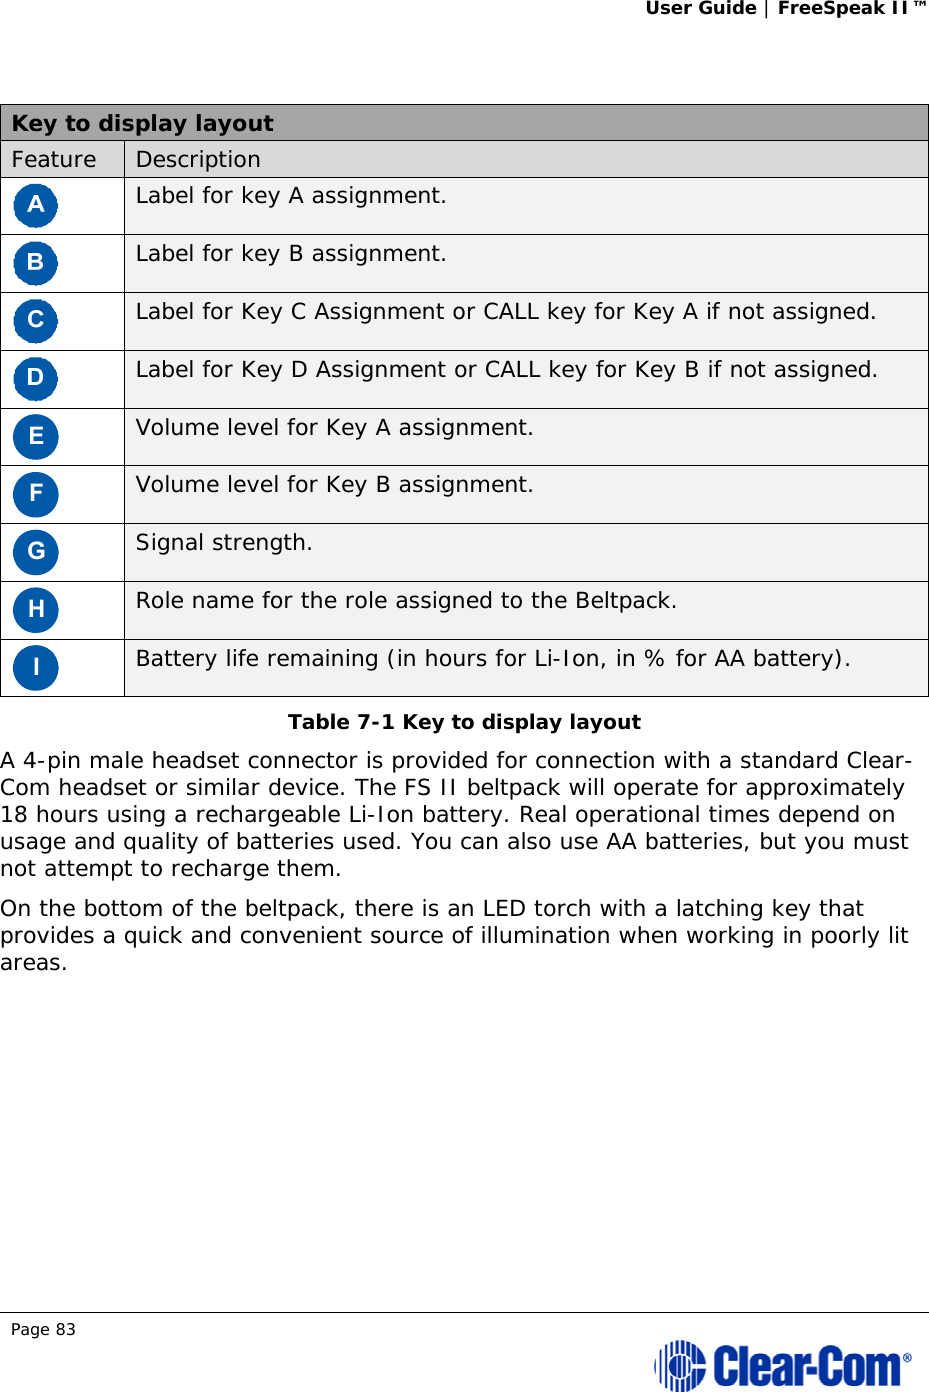 User Guide | FreeSpeak II™  Page 83   Key to display layout Feature  Description  Label for key A assignment.  Label for key B assignment.  Label for Key C Assignment or CALL key for Key A if not assigned.  Label for Key D Assignment or CALL key for Key B if not assigned. E Volume level for Key A assignment. F Volume level for Key B assignment. G Signal strength. H Role name for the role assigned to the Beltpack. I Battery life remaining (in hours for Li-Ion, in % for AA battery). Table 7-1 Key to display layout A 4-pin male headset connector is provided for connection with a standard Clear-Com headset or similar device. The FS II beltpack will operate for approximately 18 hours using a rechargeable Li-Ion battery. Real operational times depend on usage and quality of batteries used. You can also use AA batteries, but you must not attempt to recharge them. On the bottom of the beltpack, there is an LED torch with a latching key that provides a quick and convenient source of illumination when working in poorly lit areas.  